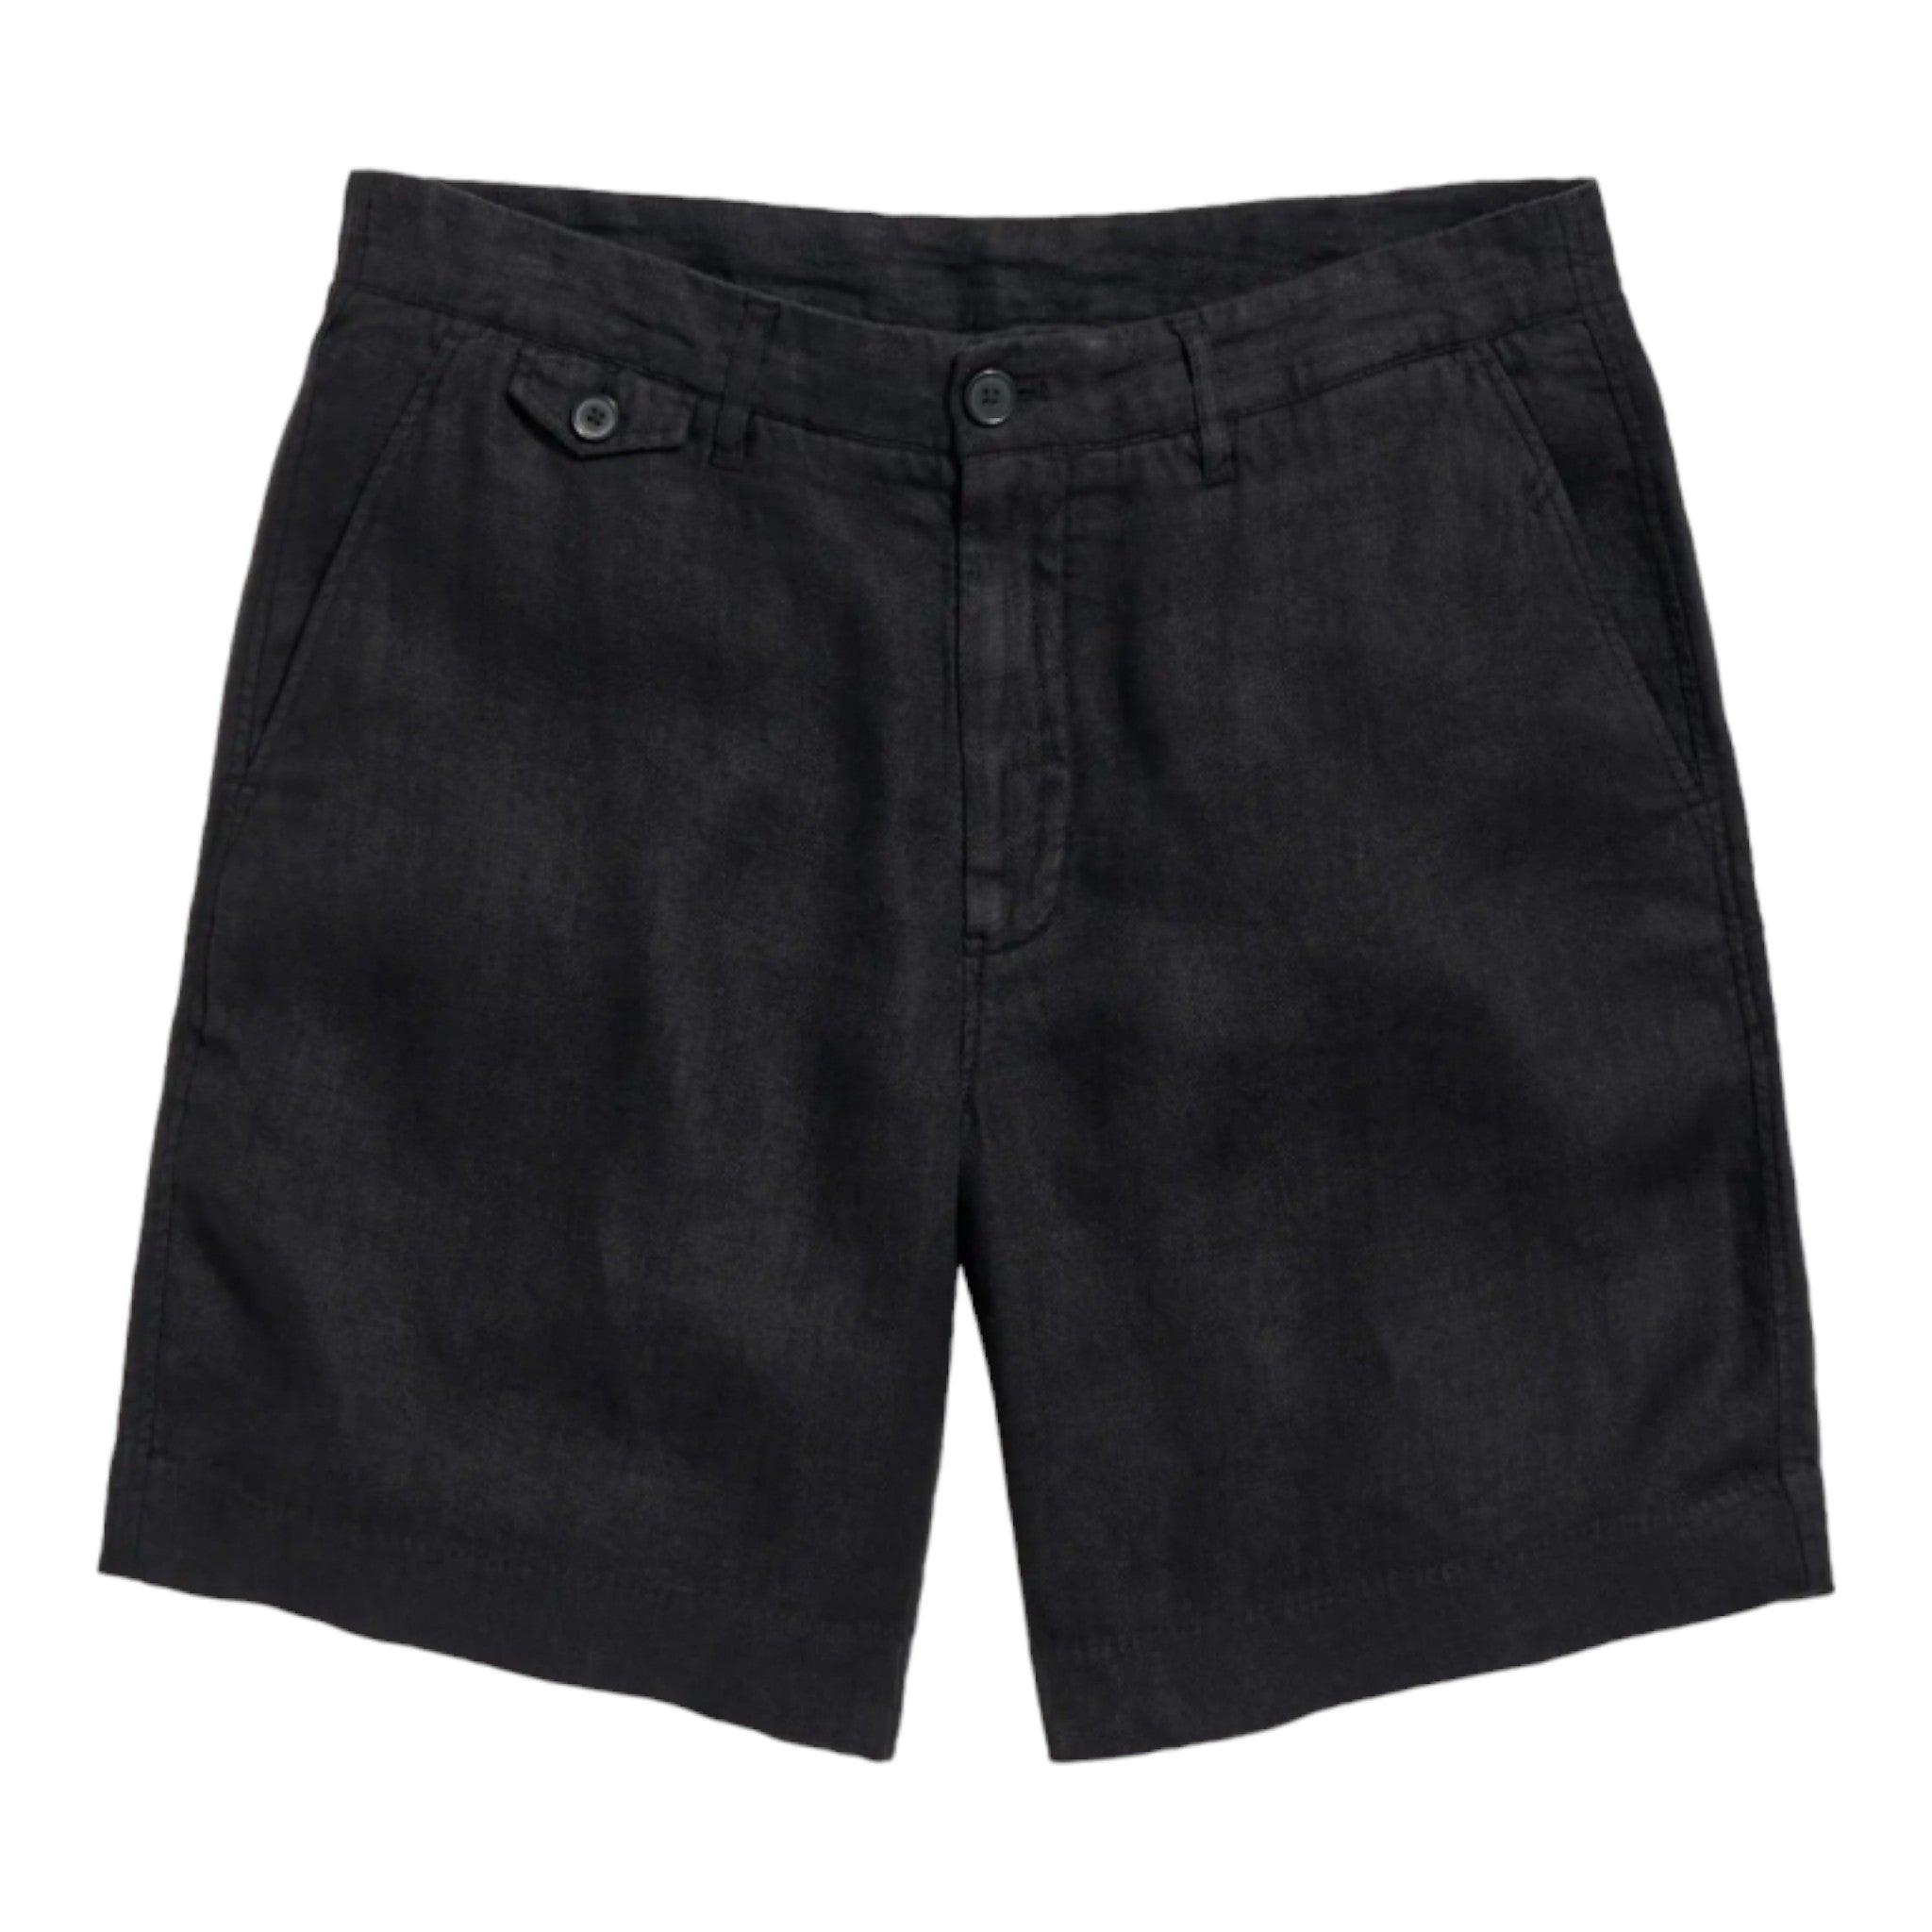 Black shorts with button and zip closure